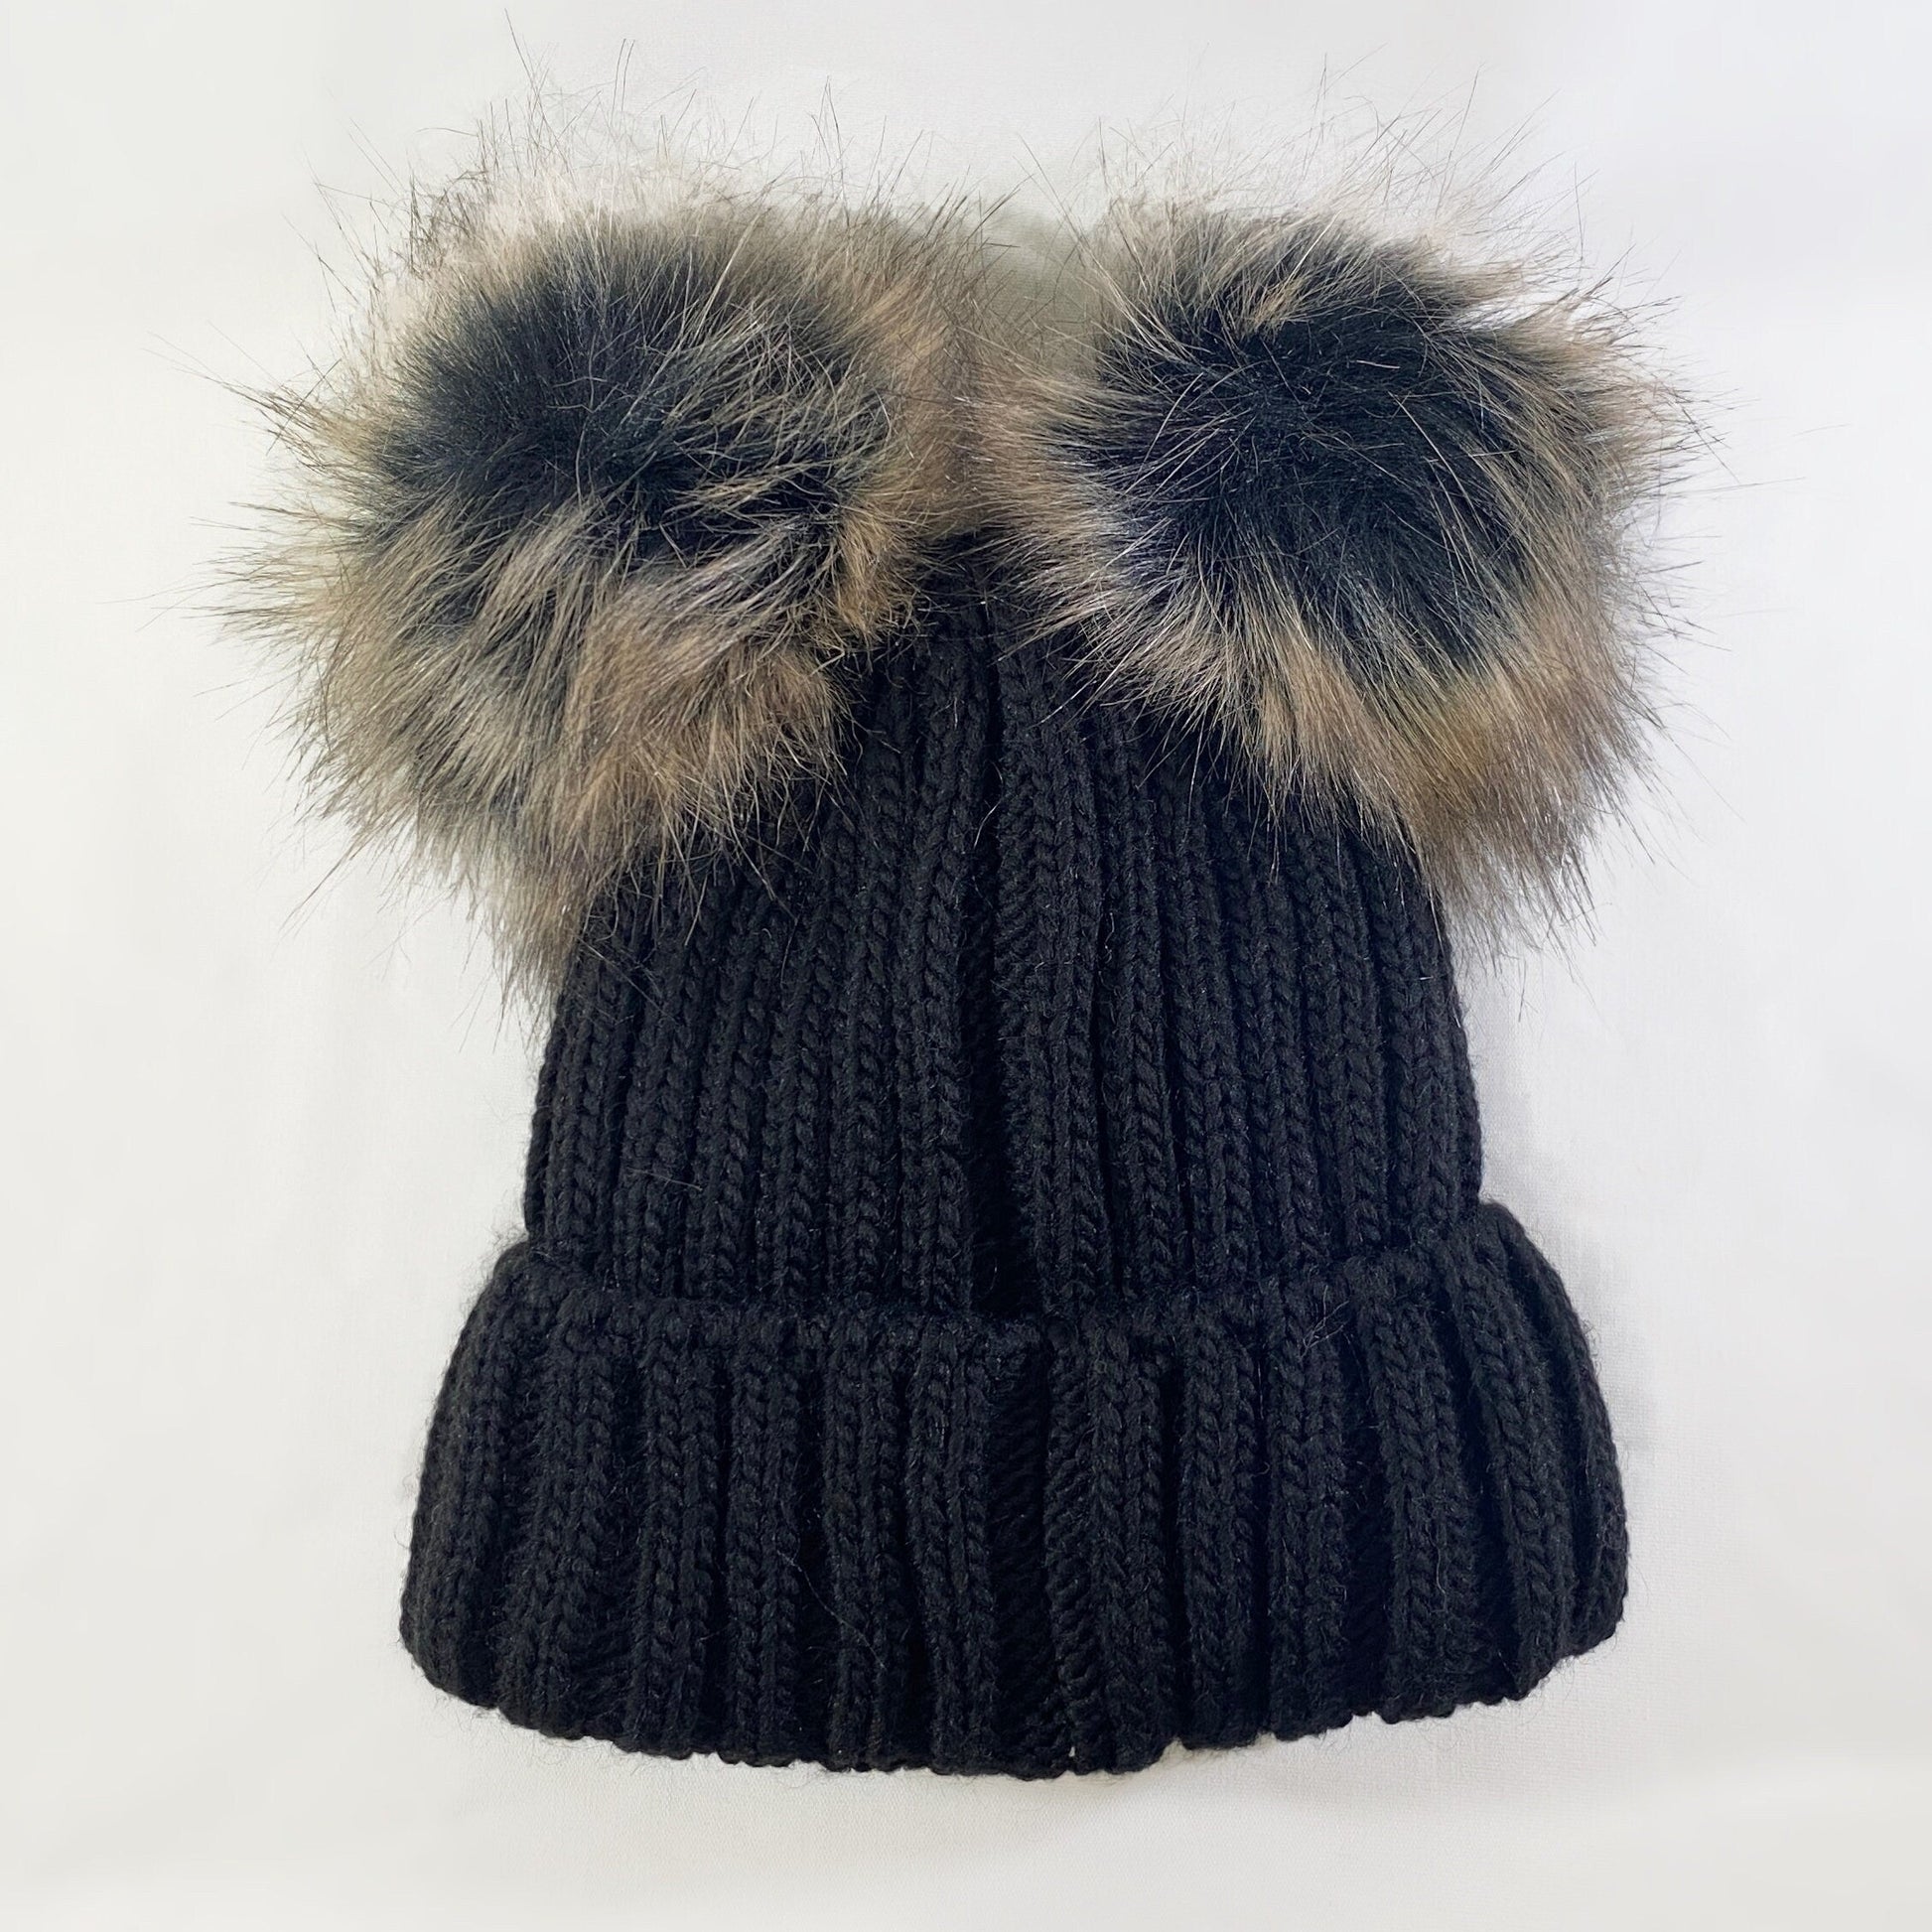 Black and Brown Winter Beanie With Dual Pompoms - Made From Italian Wool, Acrylic Yarn, and Faux Fur